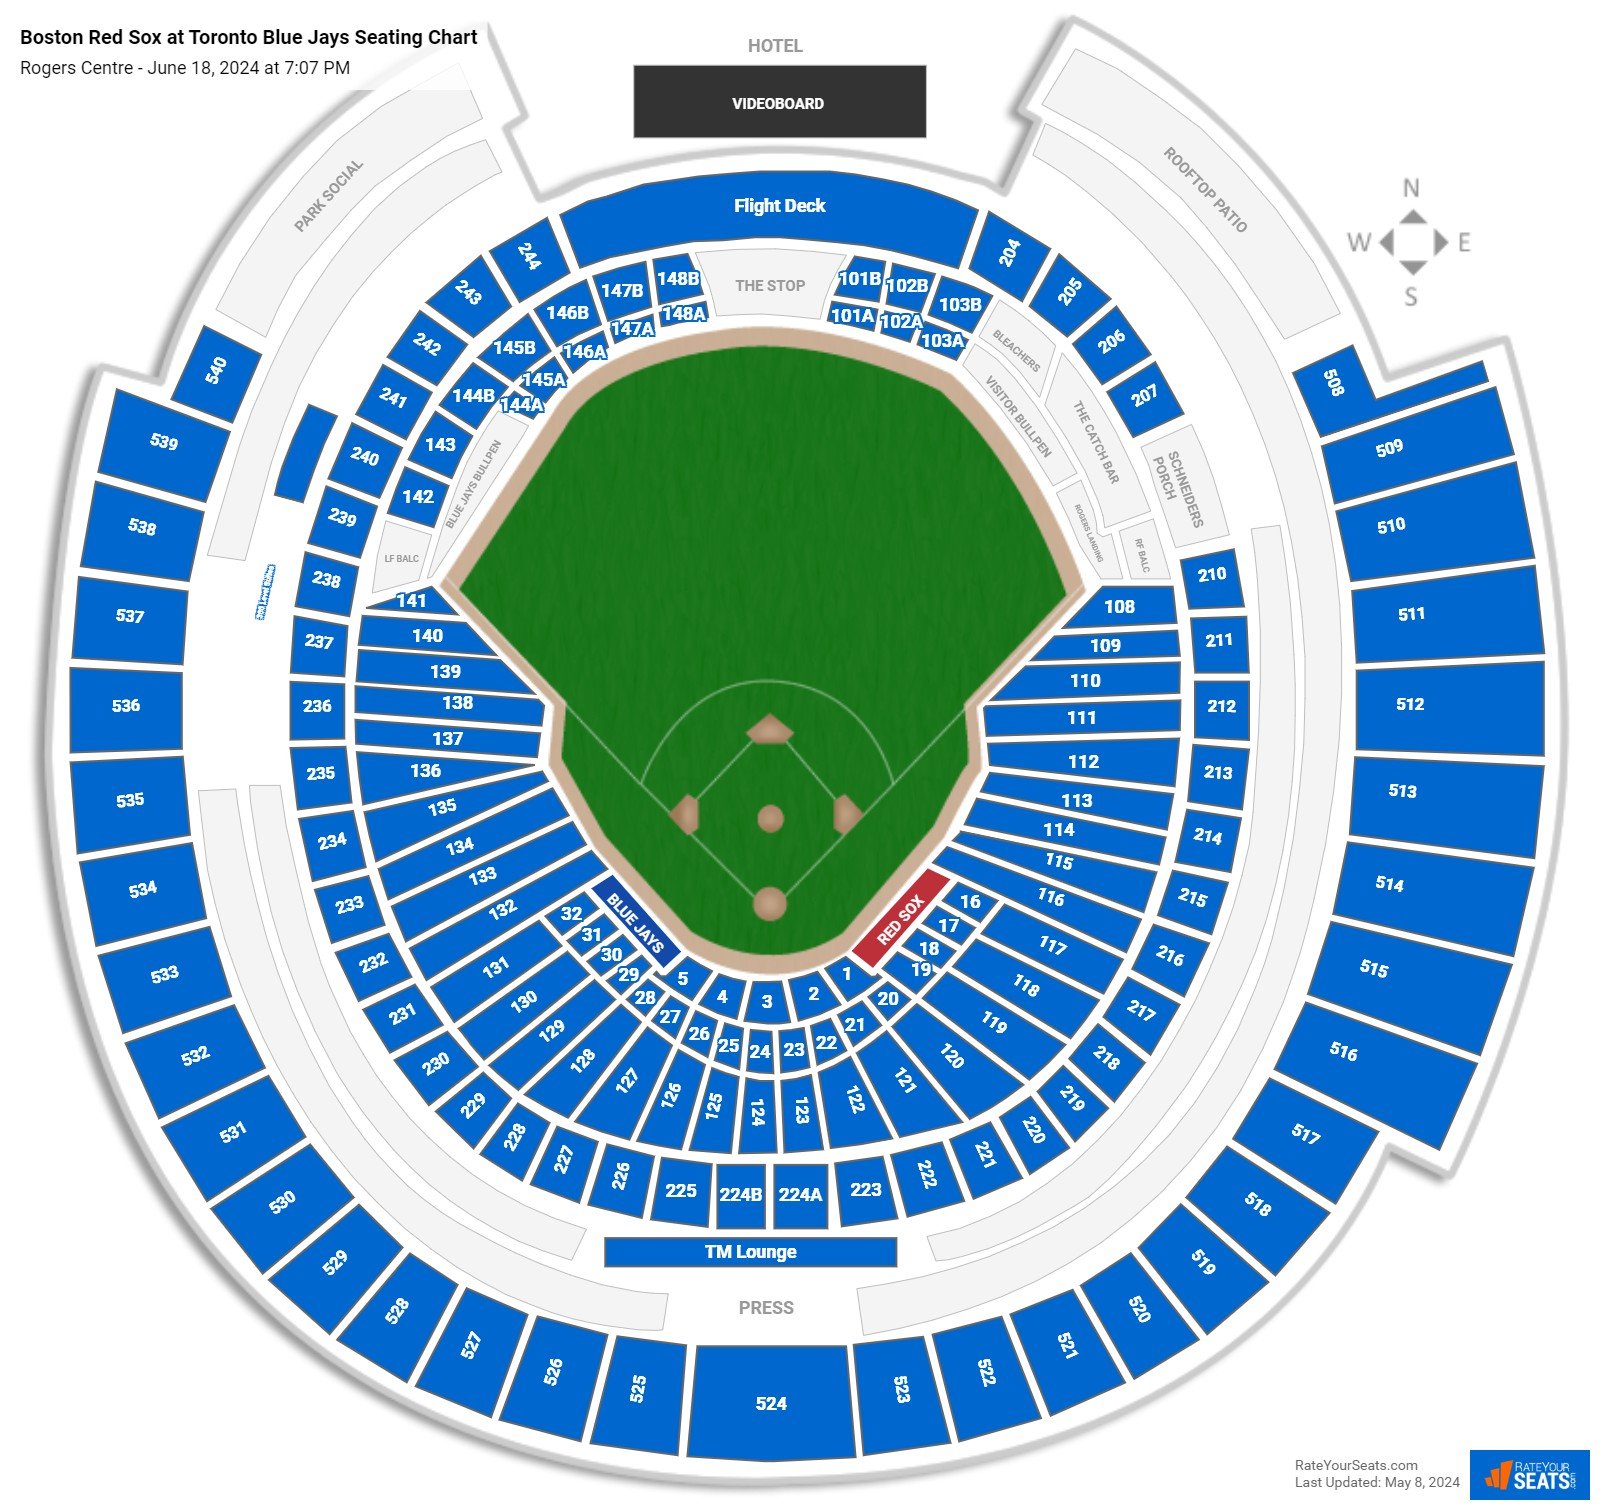 Boston Red Sox at Toronto Blue Jays seating chart Rogers Centre